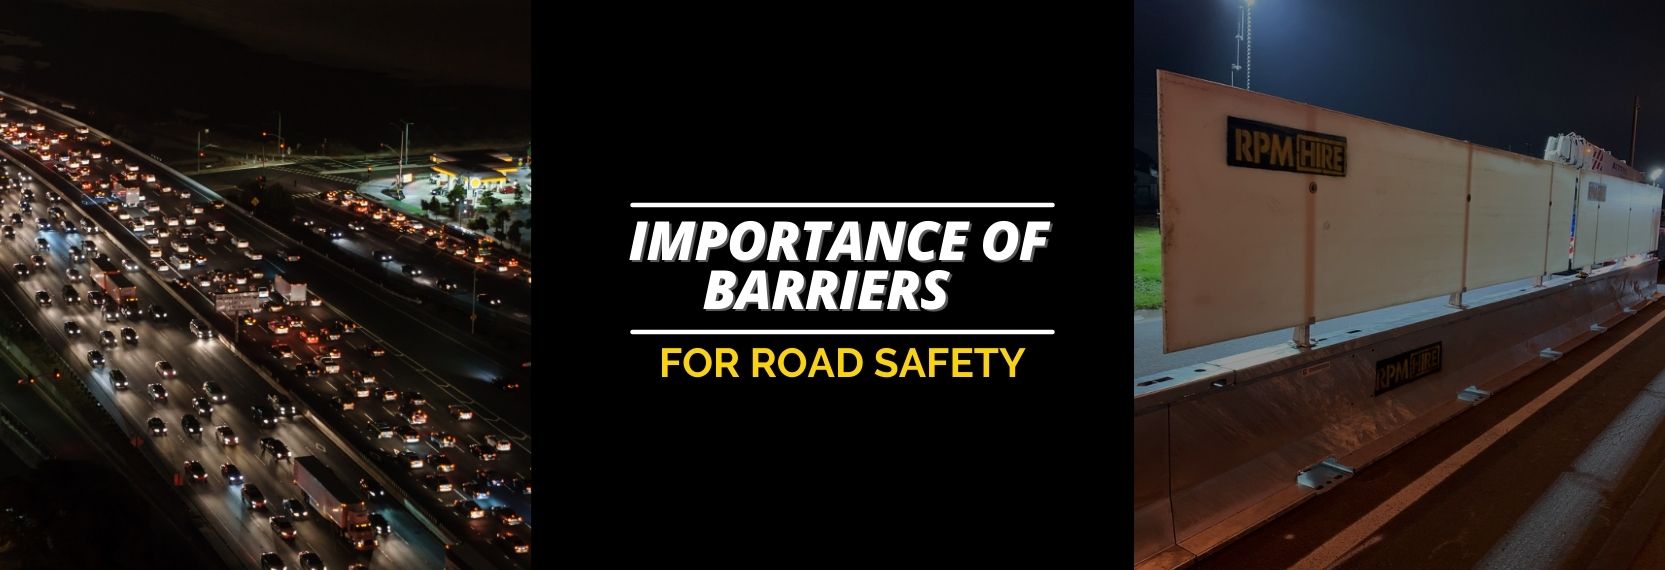 Importance of Barriers for Road Safety Cover